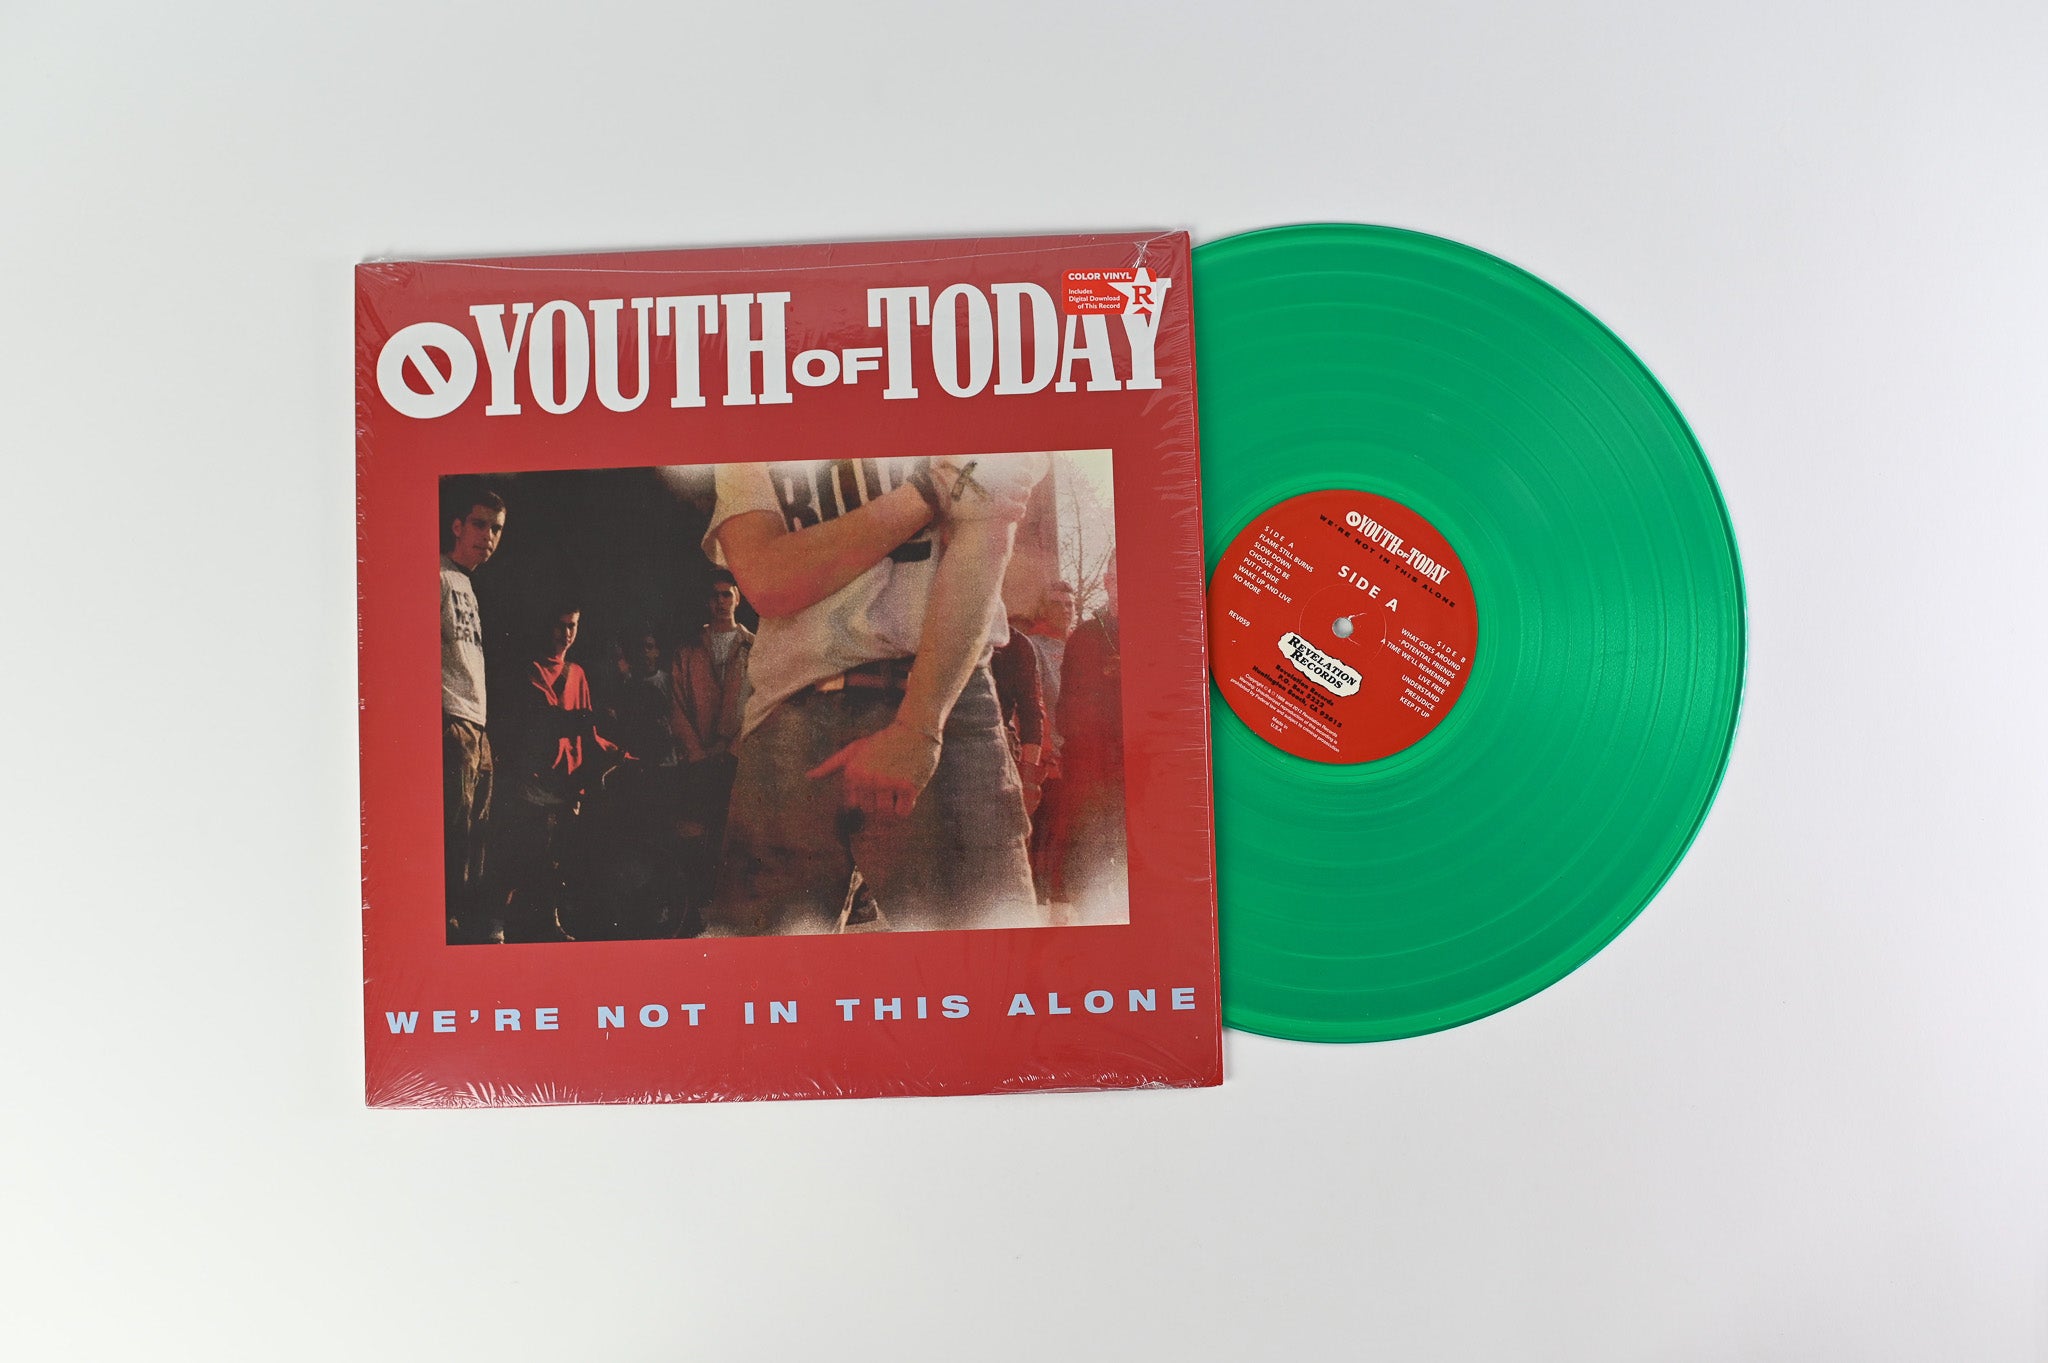 Youth Of Today - We're Not In This Alone on Revelation Records on Green Translucent Vinyl